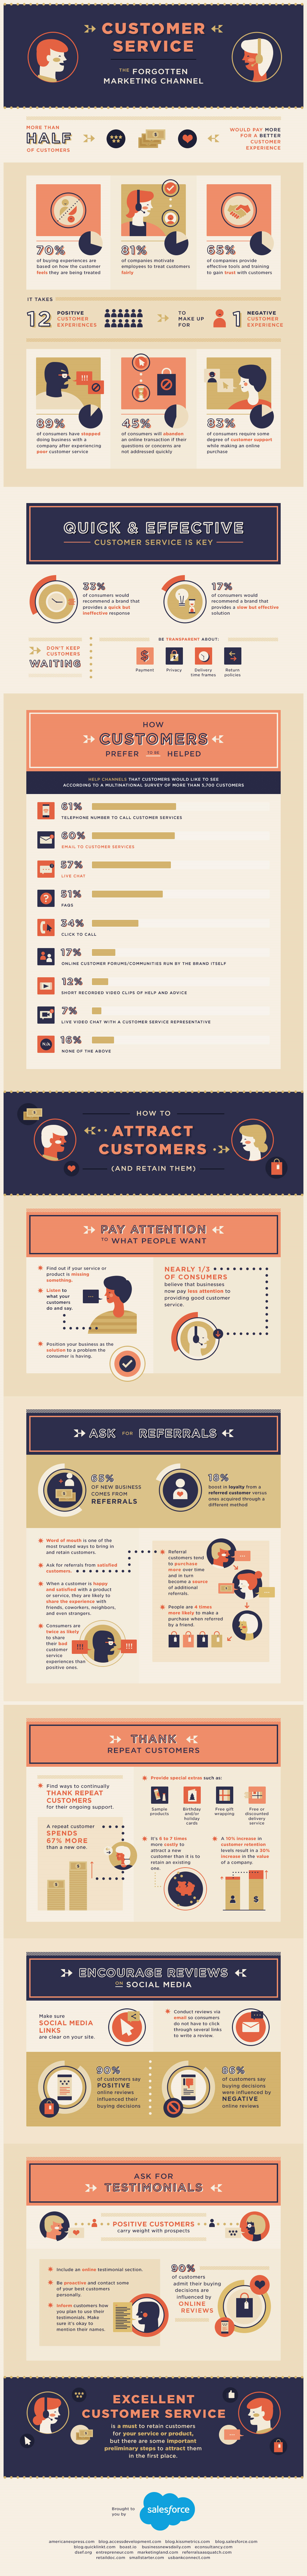 Infographic - Customer Service: The Forgotten Marketing Channel